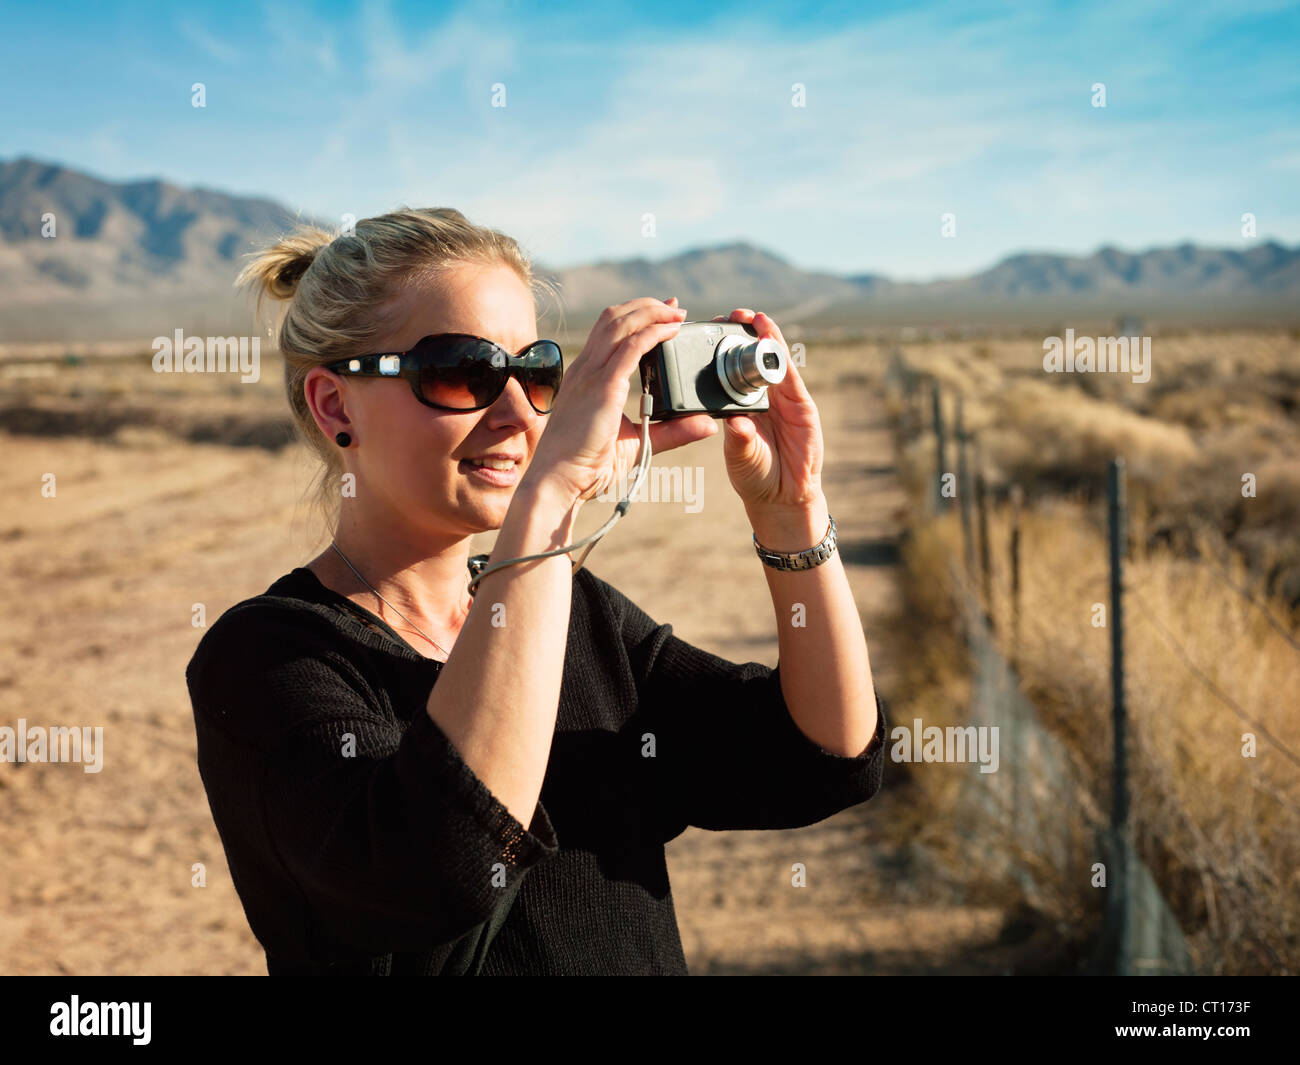 Woman taking pictures in rural field Stock Photo